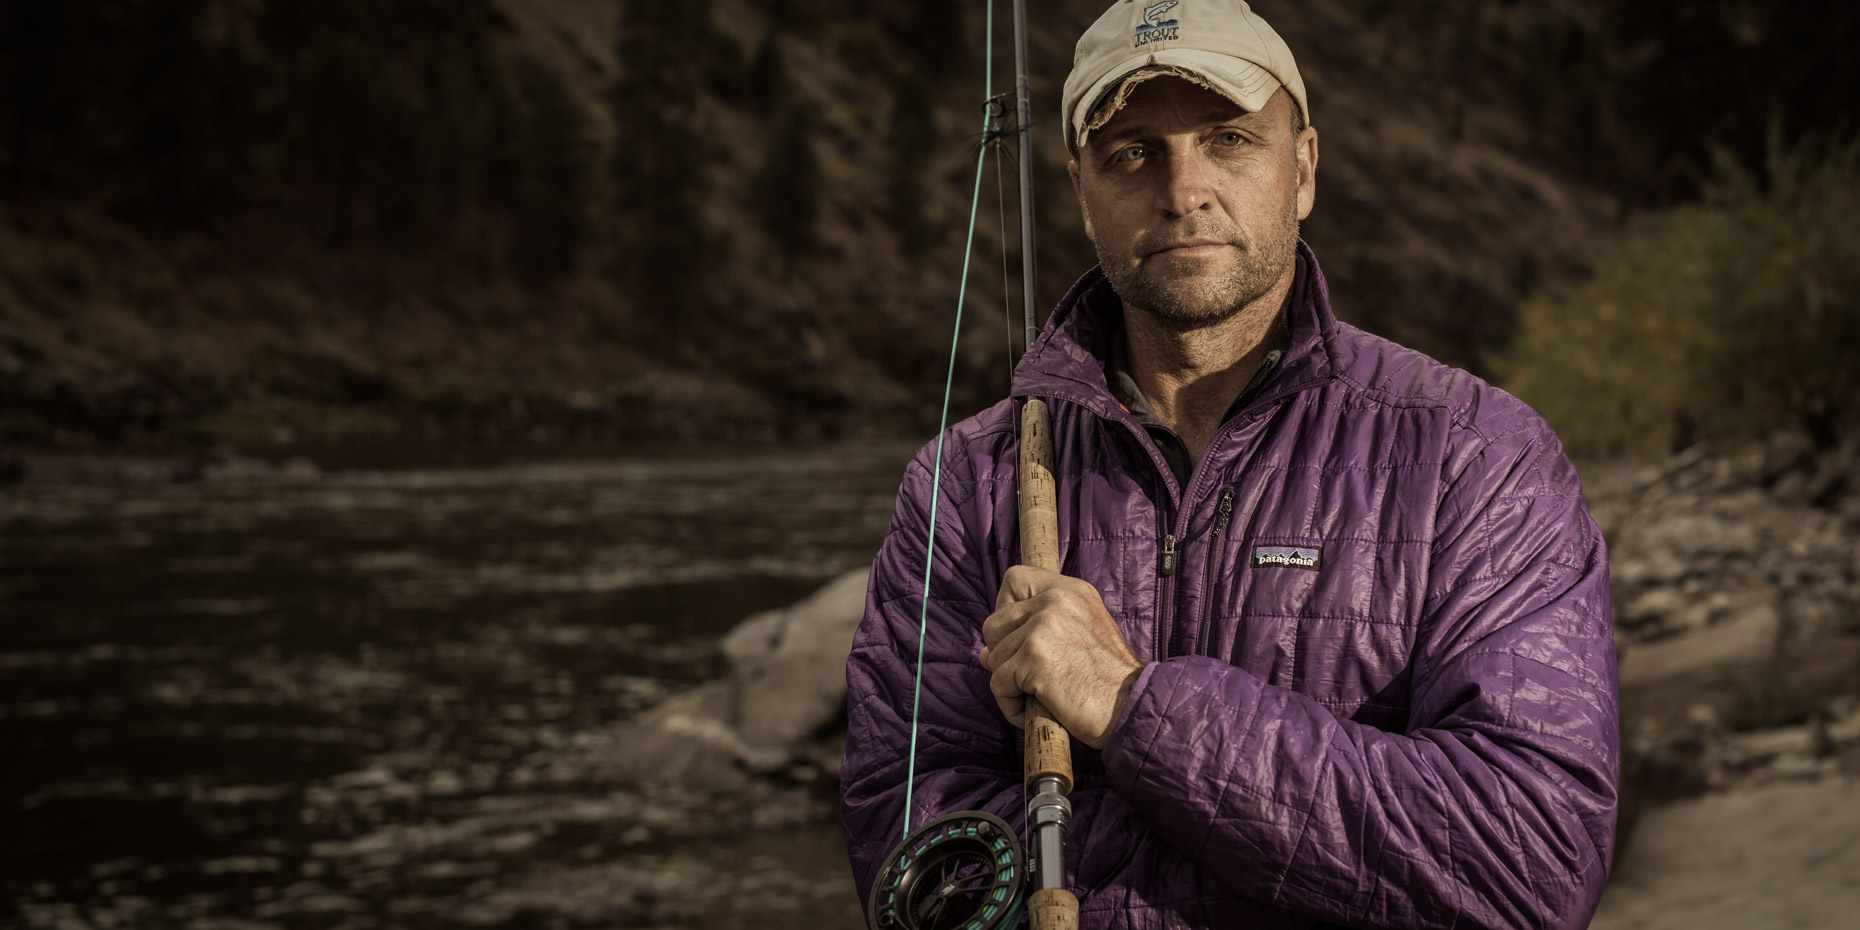 Rob Masonis for Trout Unlimited